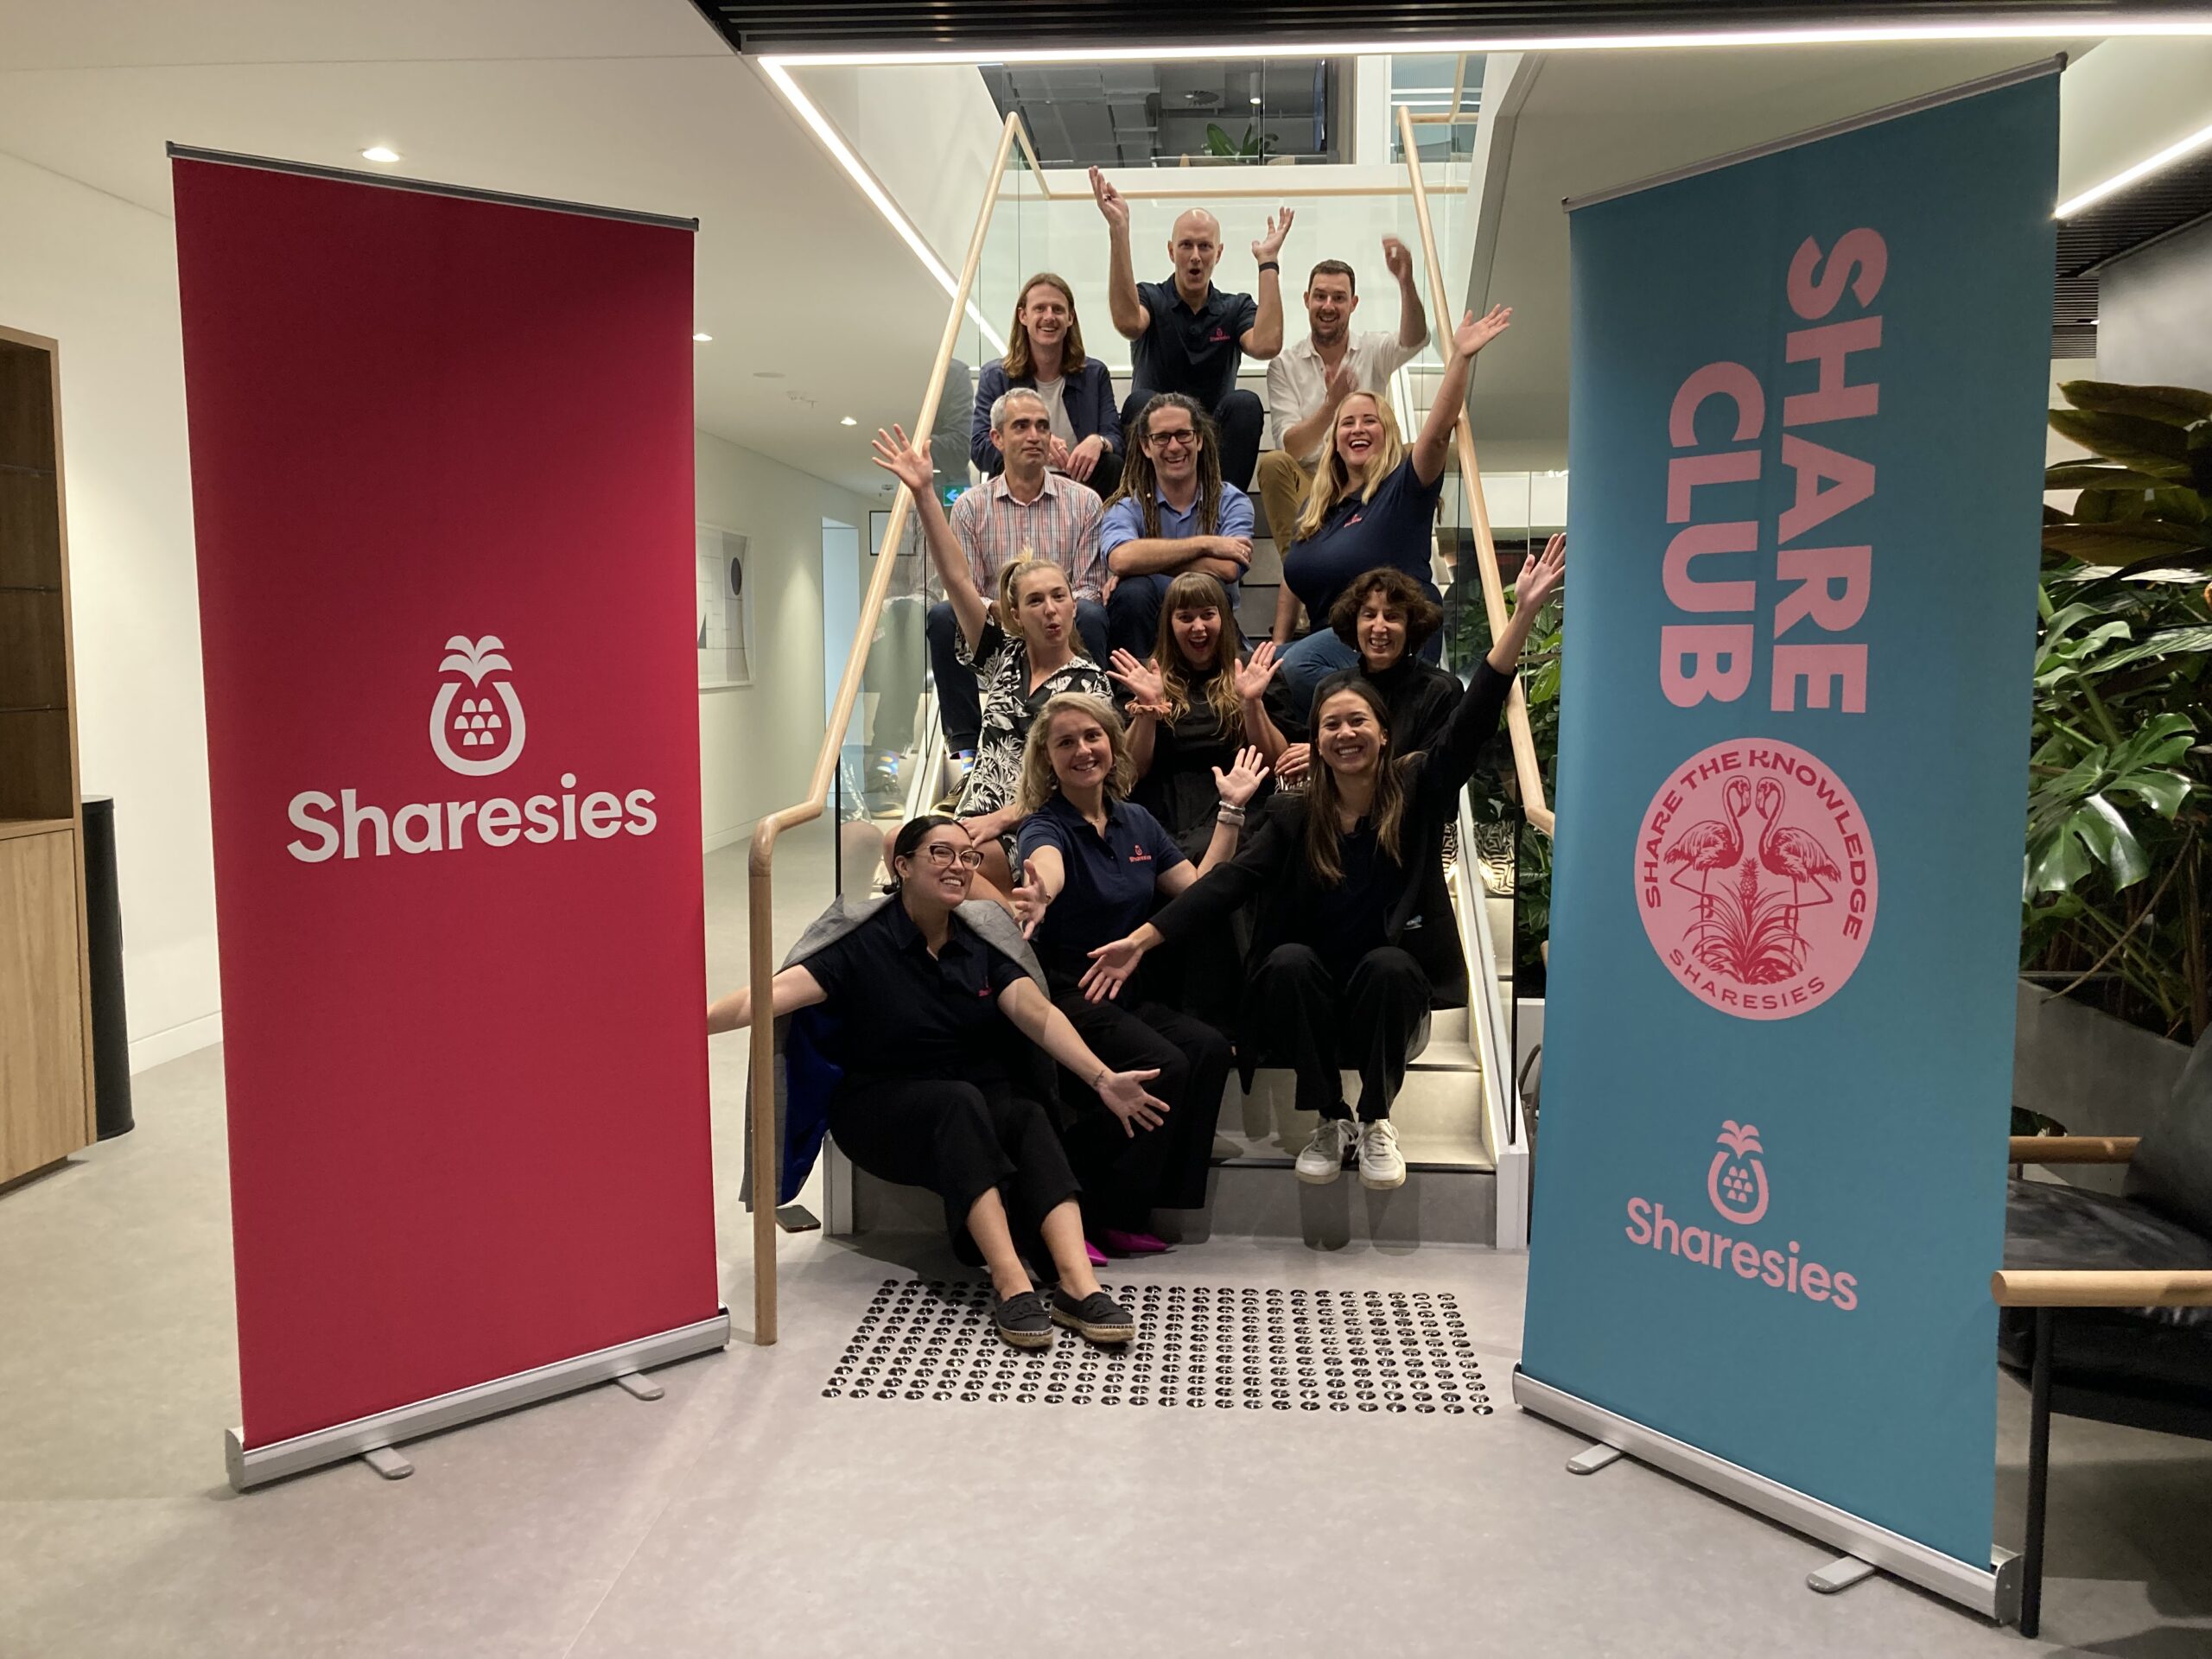 An investment in investing – Sharesies expands into Aus market